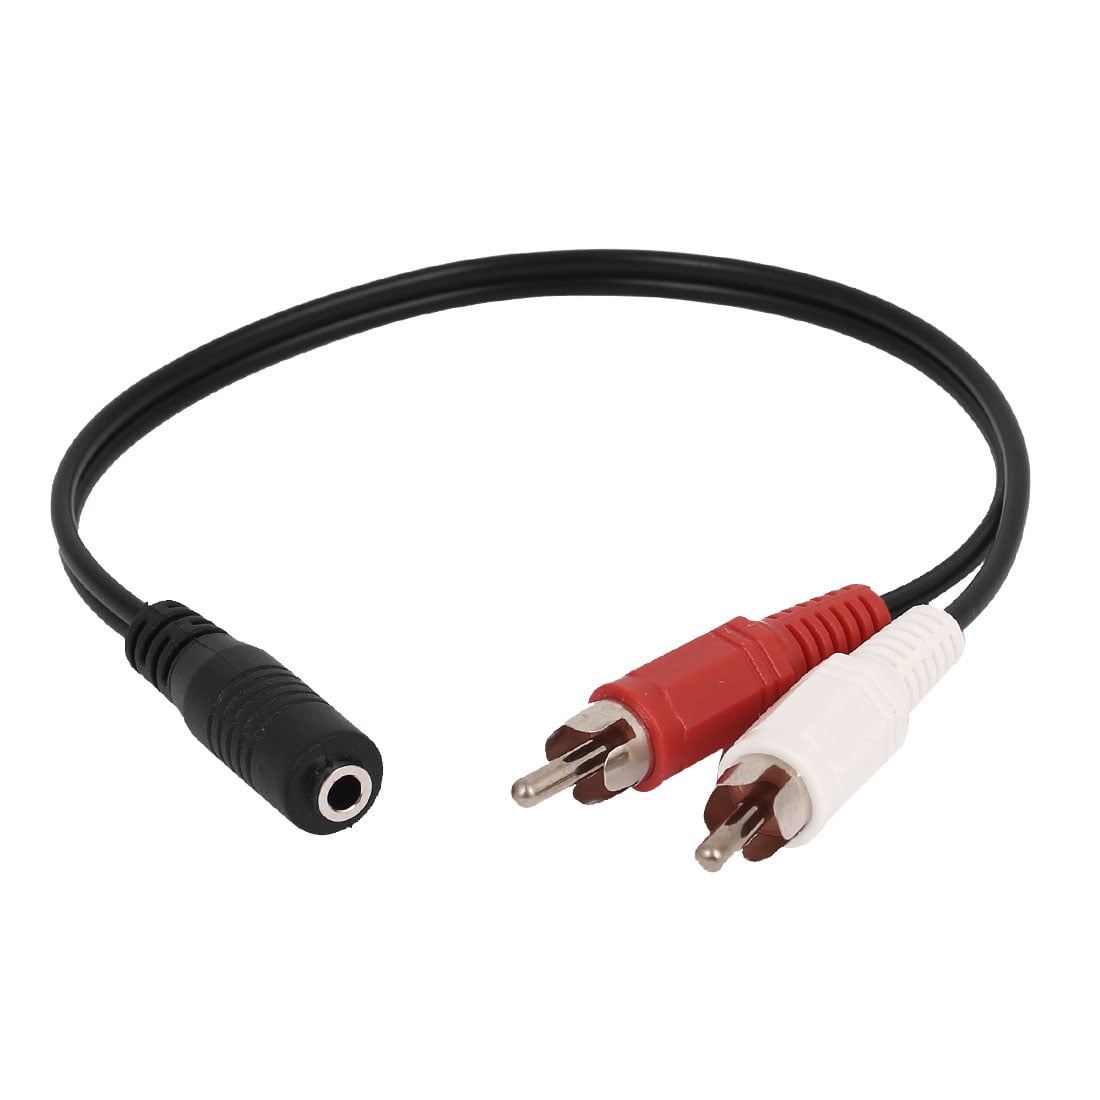 3.5mm Female Stereo to 2 RCA Male AV Audio Aux Cable Cord Adapter | Walmart Canada